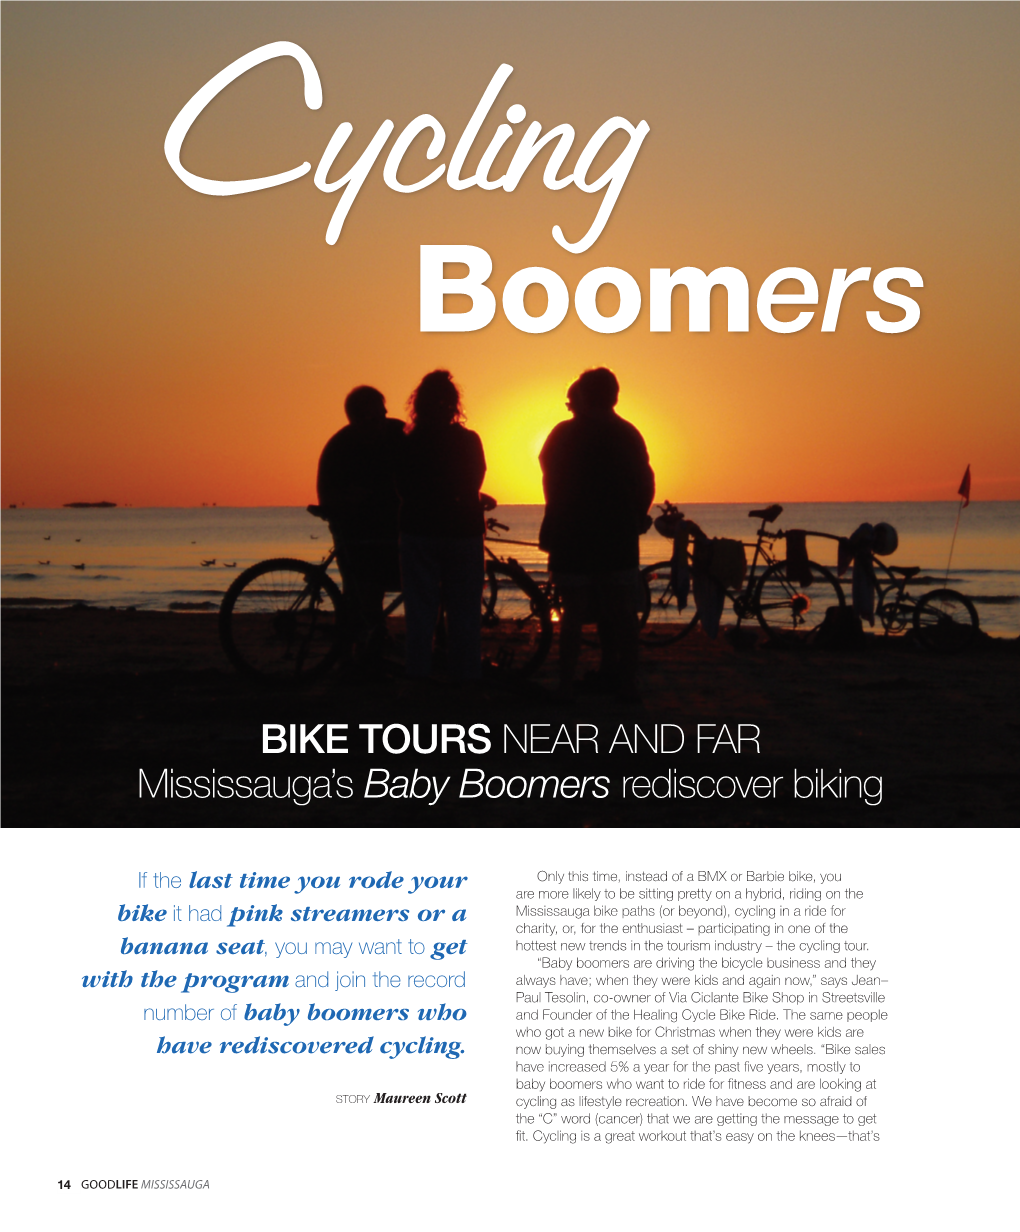 Bike Tours Near and Far Mississauga's Baby Boomers